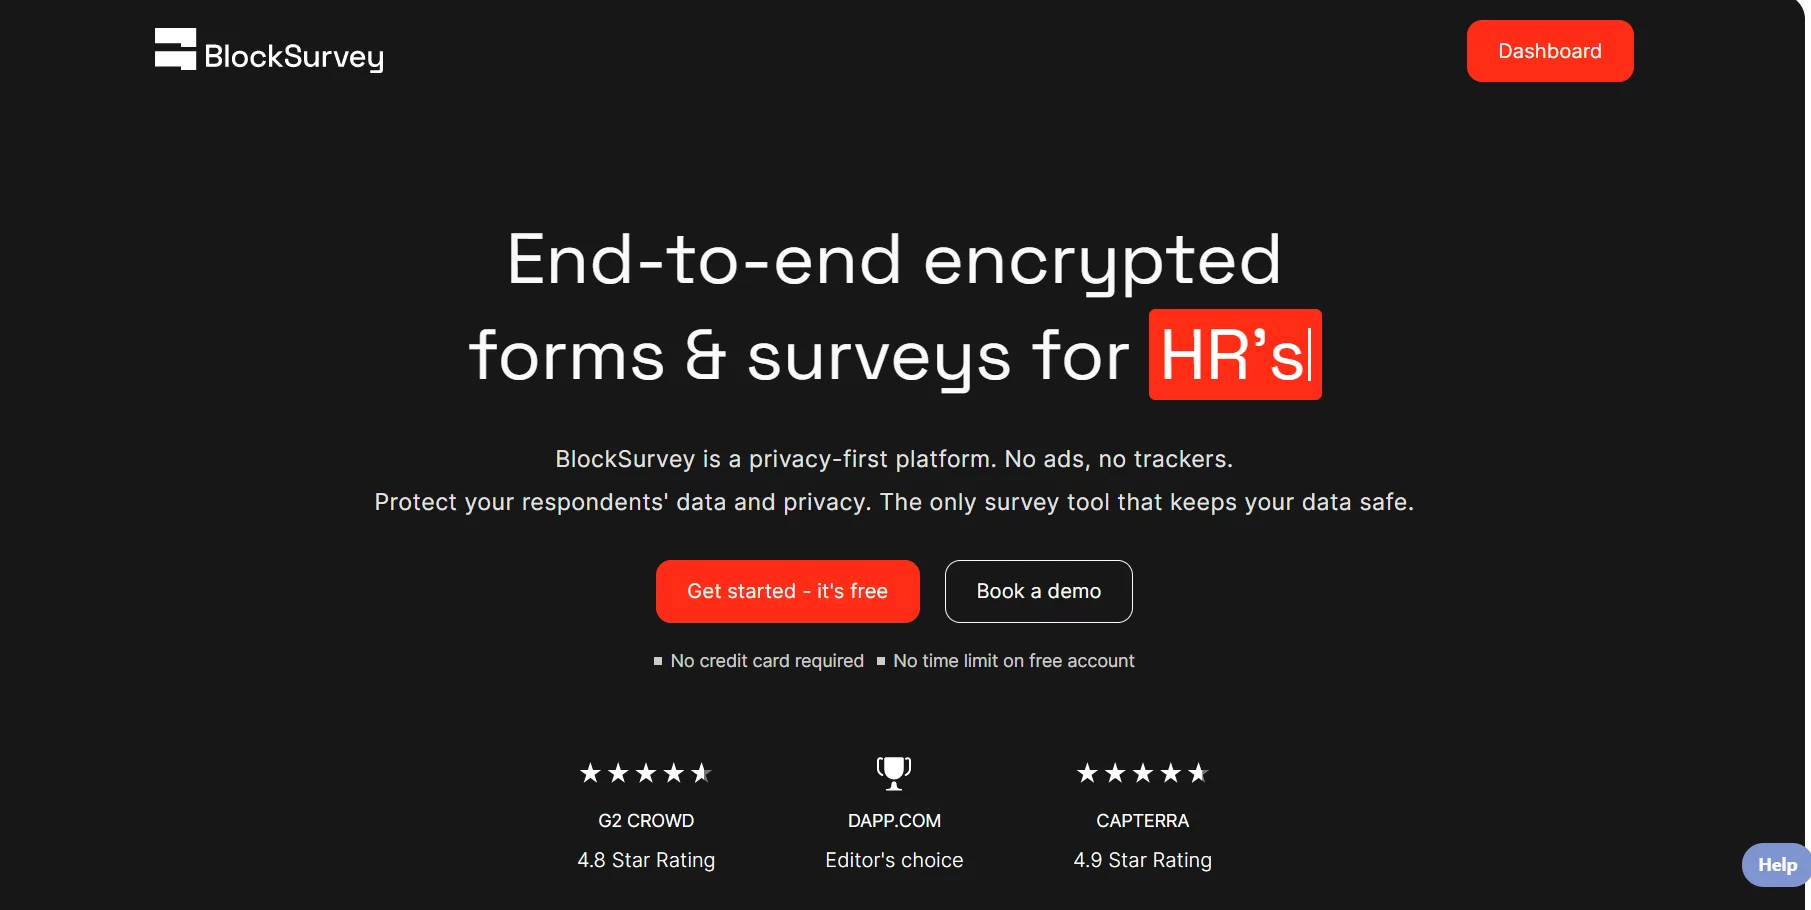  End-to-end encrypted forms & surveys